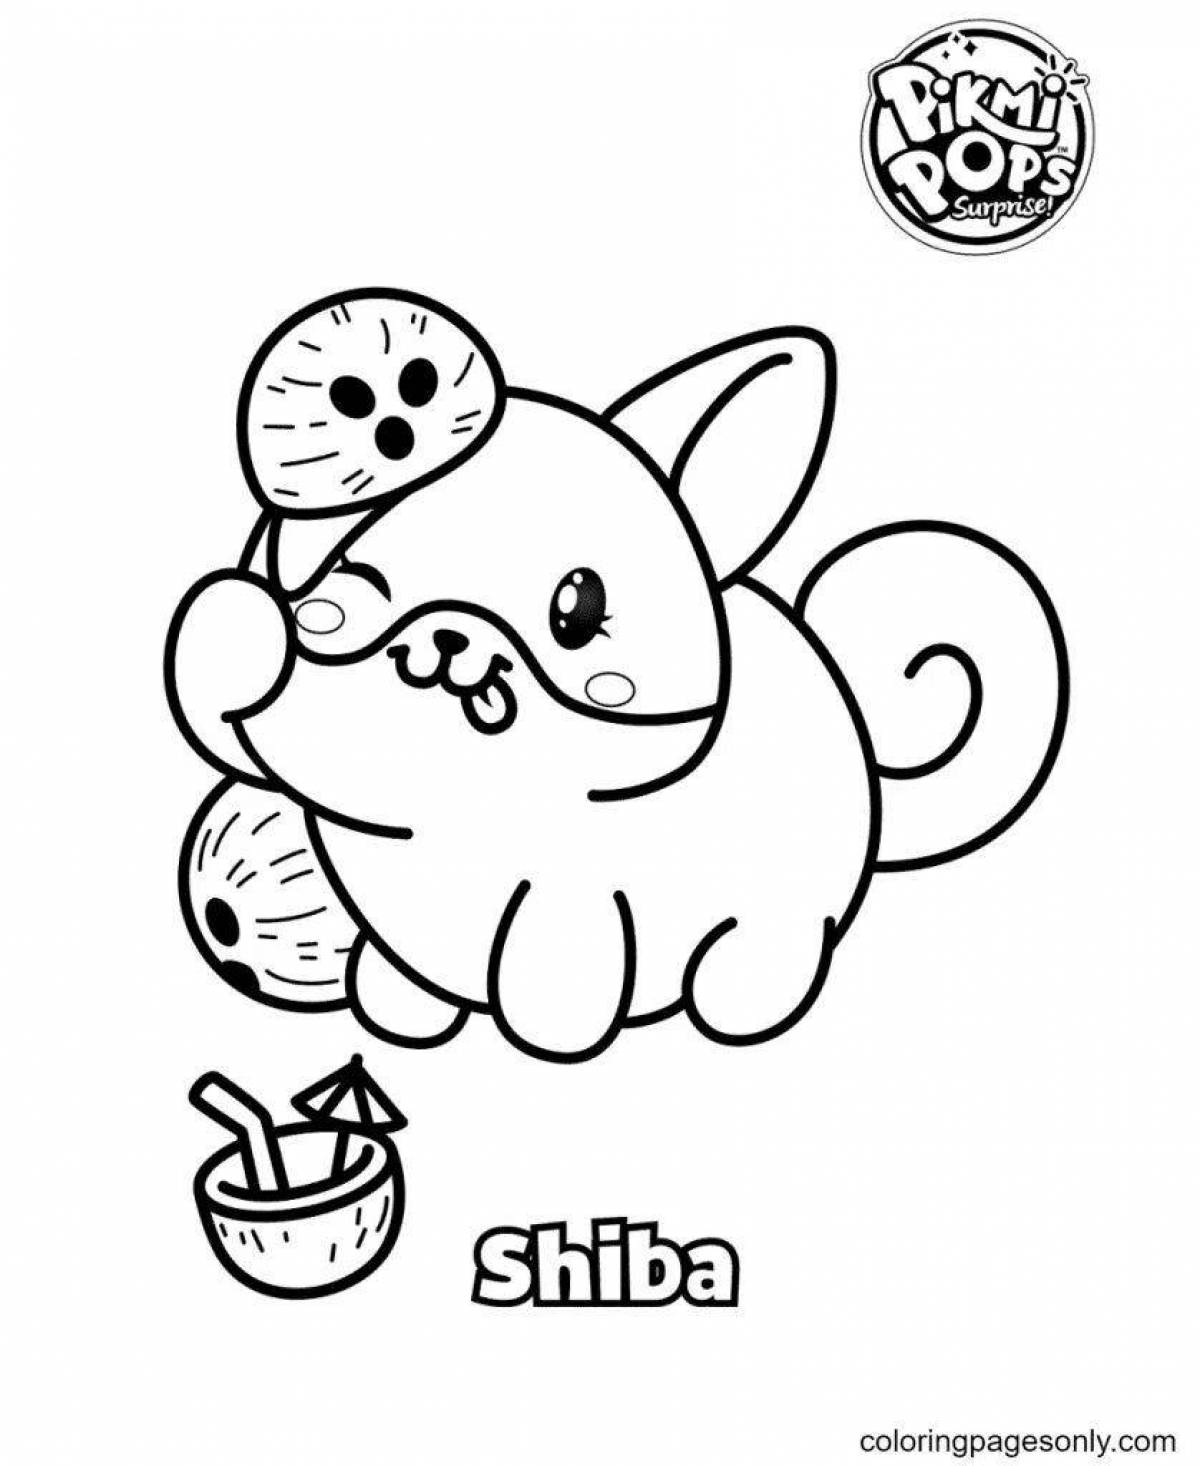 Animated pikmy pops coloring page